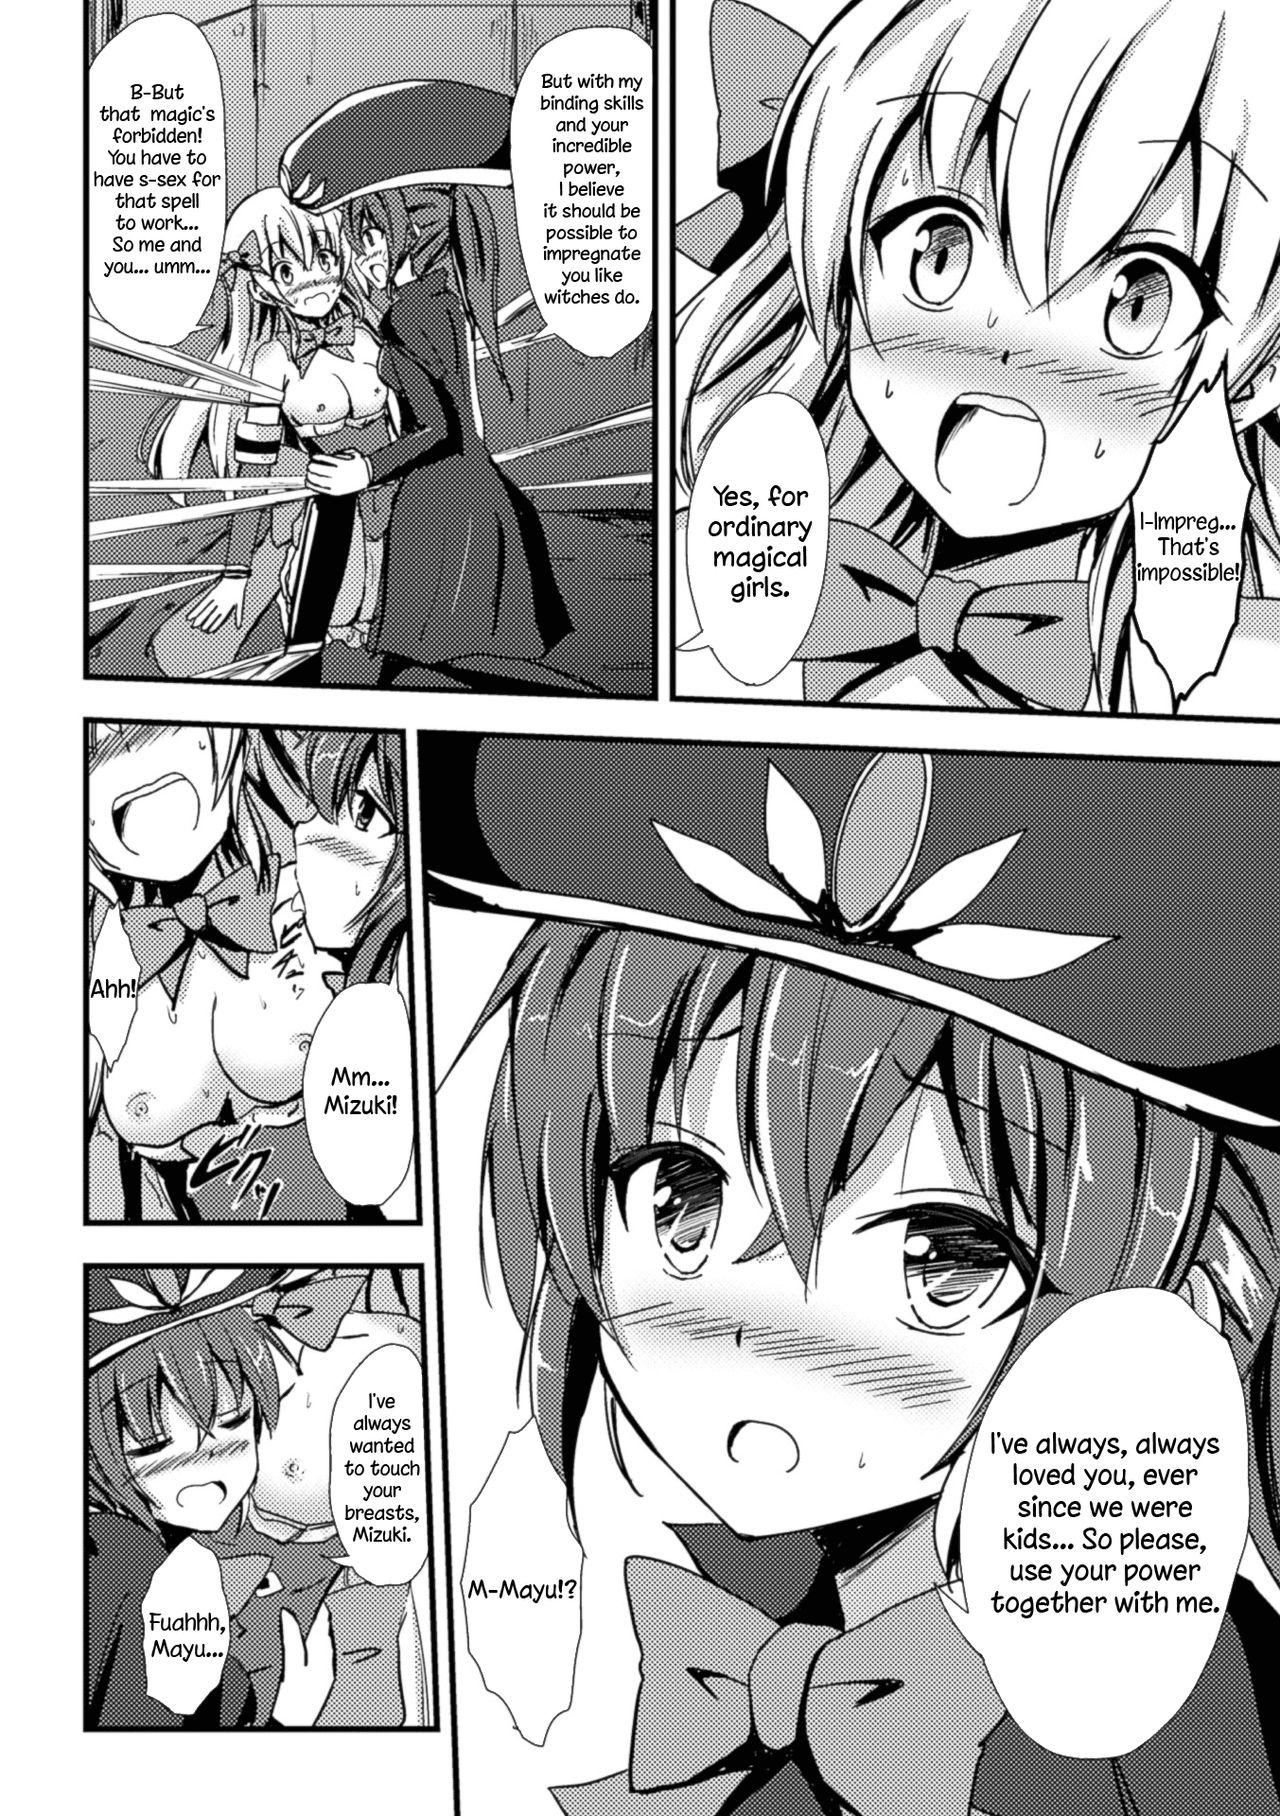 Large Mahou Shoujo to Yuri no Ori | The Magical Girl and the Cage of Lesbianism Straight Porn - Page 6